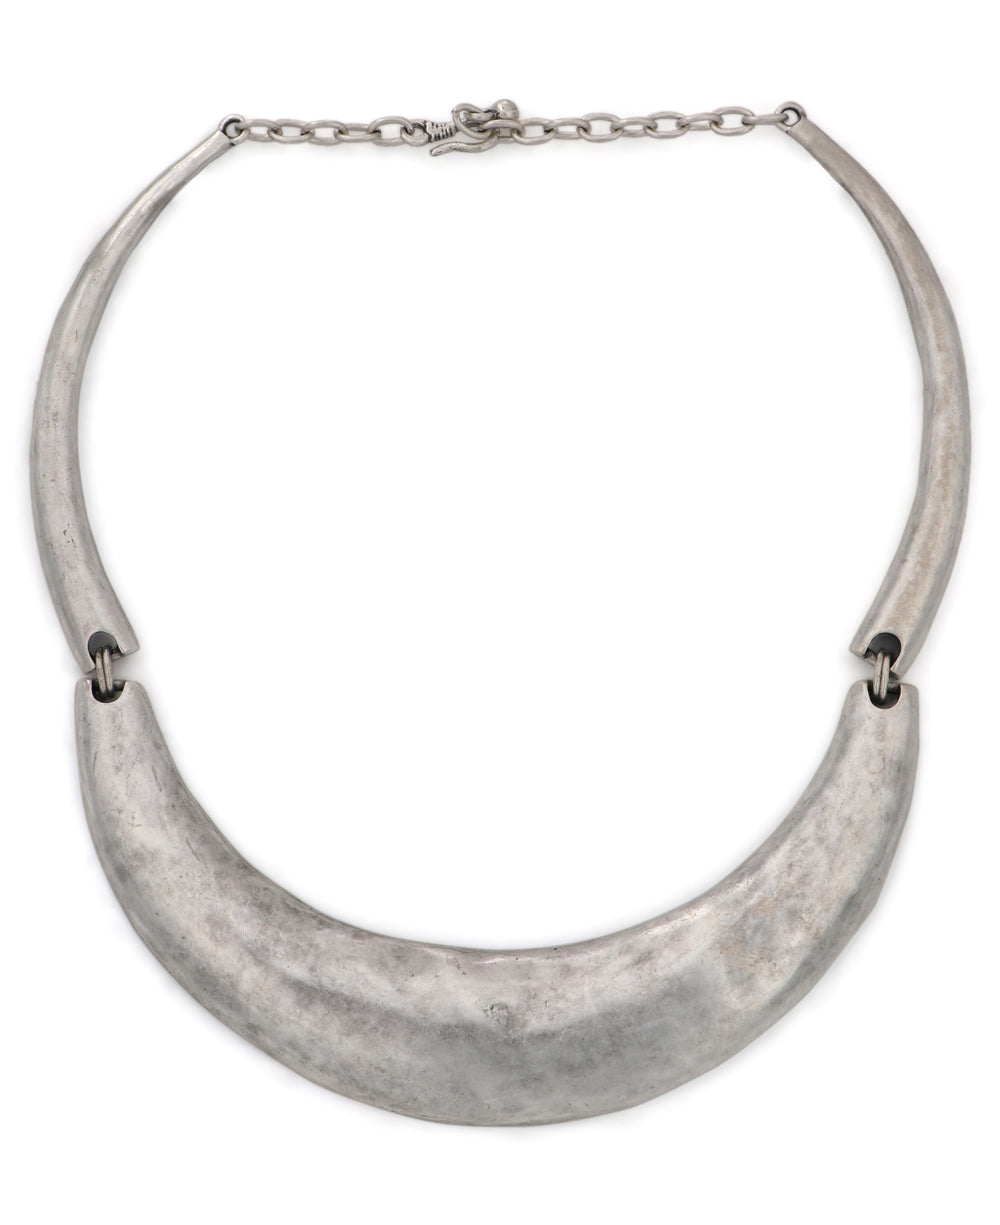 Traditional circular plate necklace